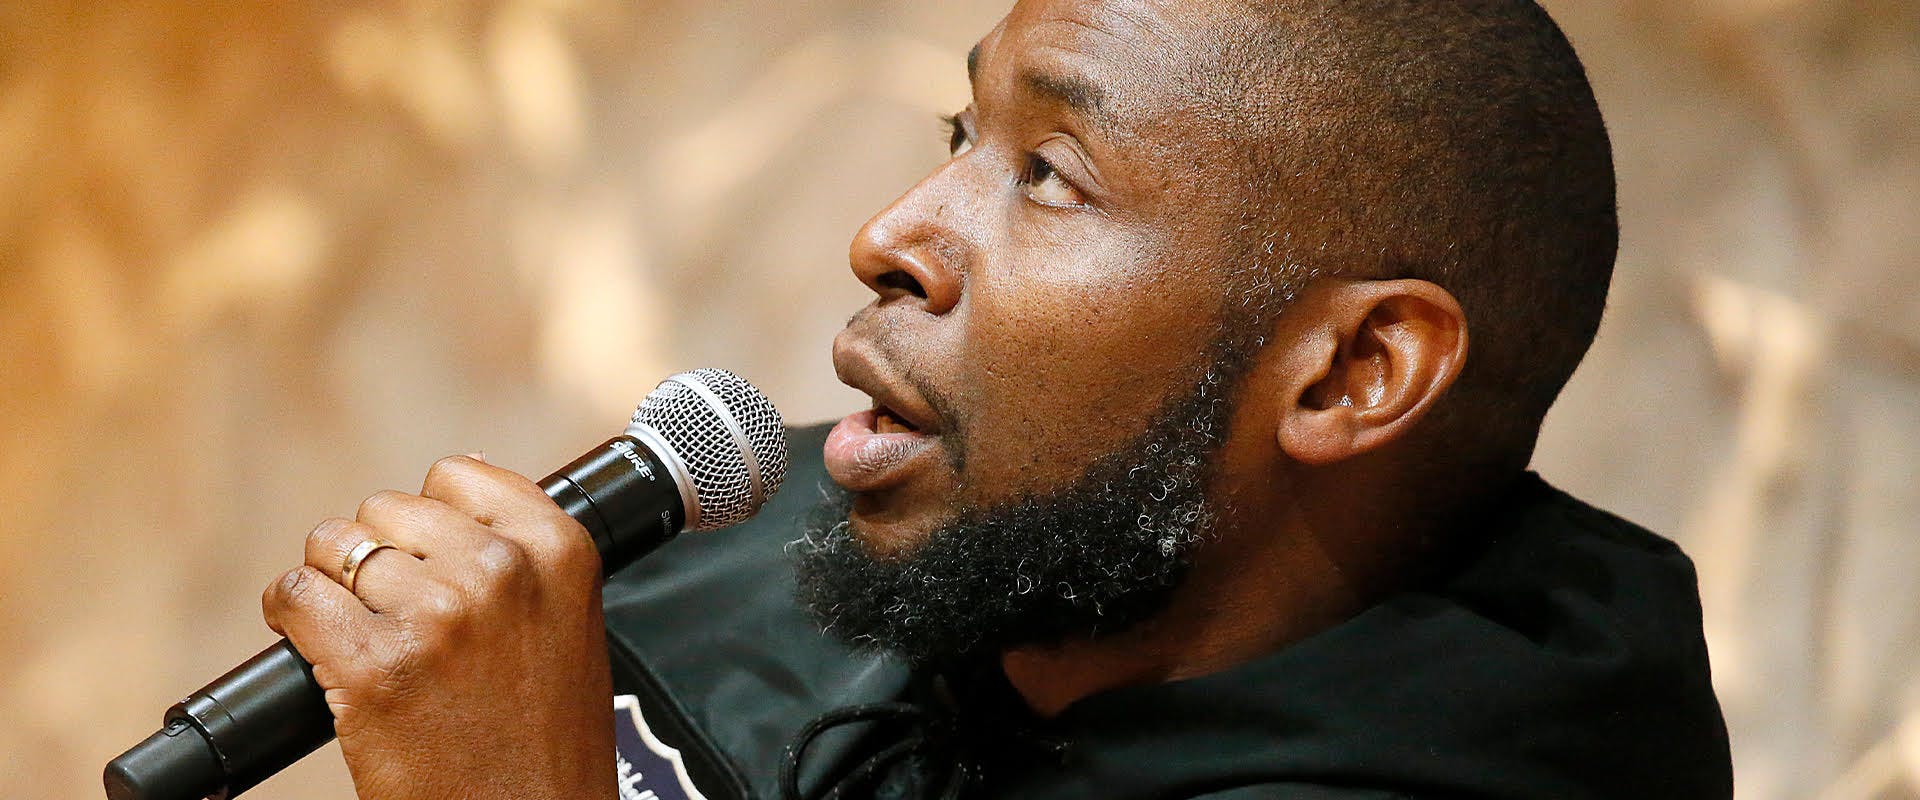 WASHINGTON, DC - MARCH 02: Record Producer, Record Executive, Lecturer, and Rapper 9th Wonder speaks during a panel discussion at The Recording Academy Washington DC Chapter's Intersection of Music & Sports event at the Kennedy Center on March 02, 2020 in Washington, DC.